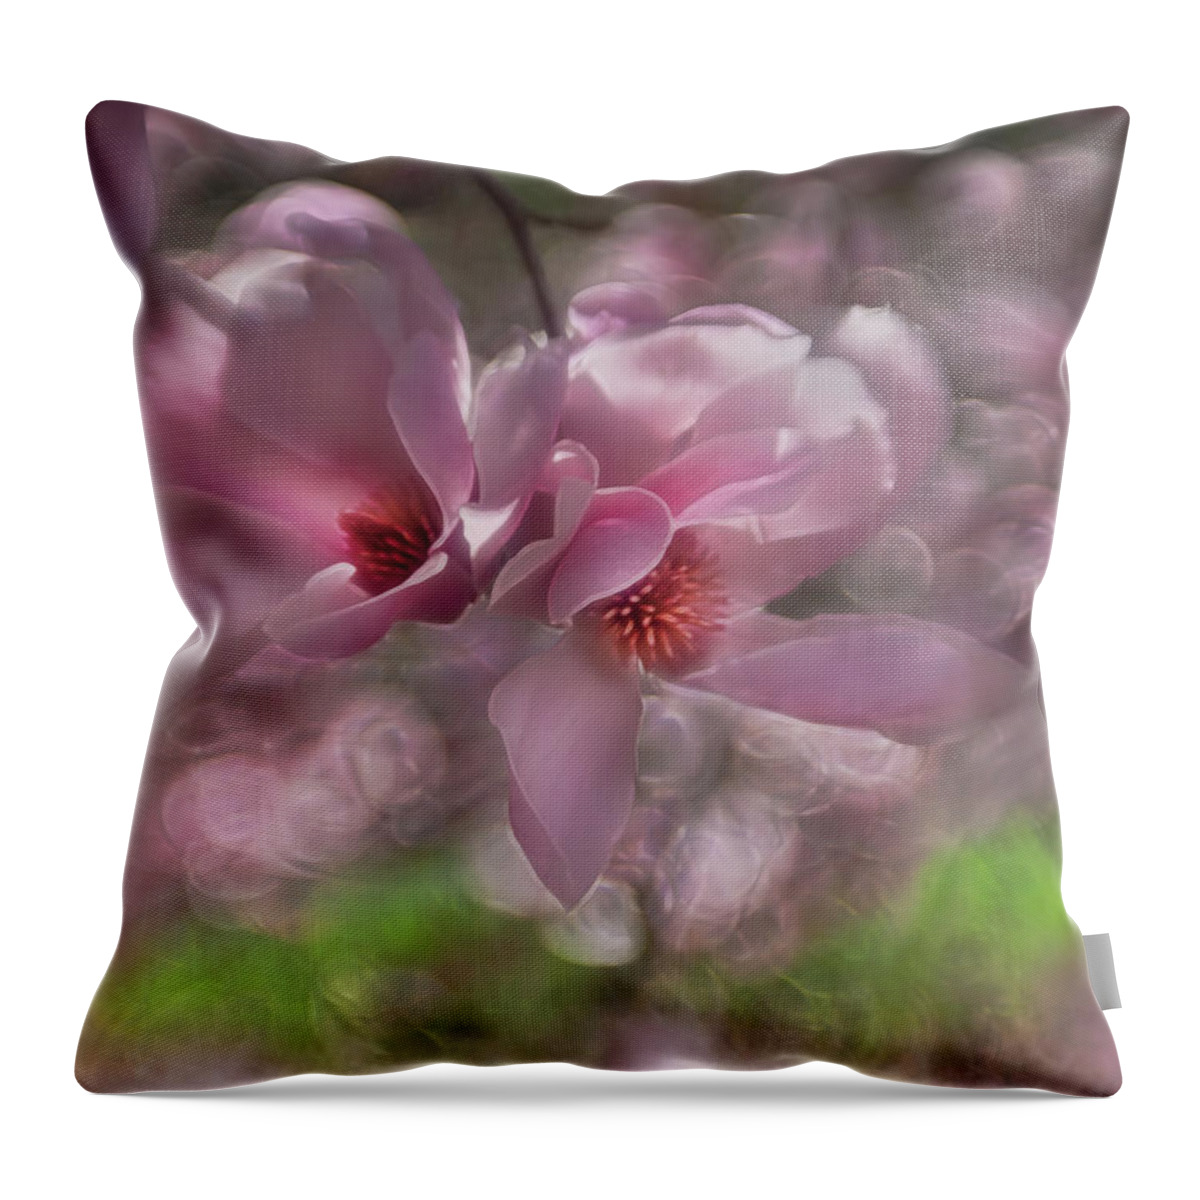 Pink Throw Pillow featuring the photograph Pink Magnolia's by Sylvia Goldkranz